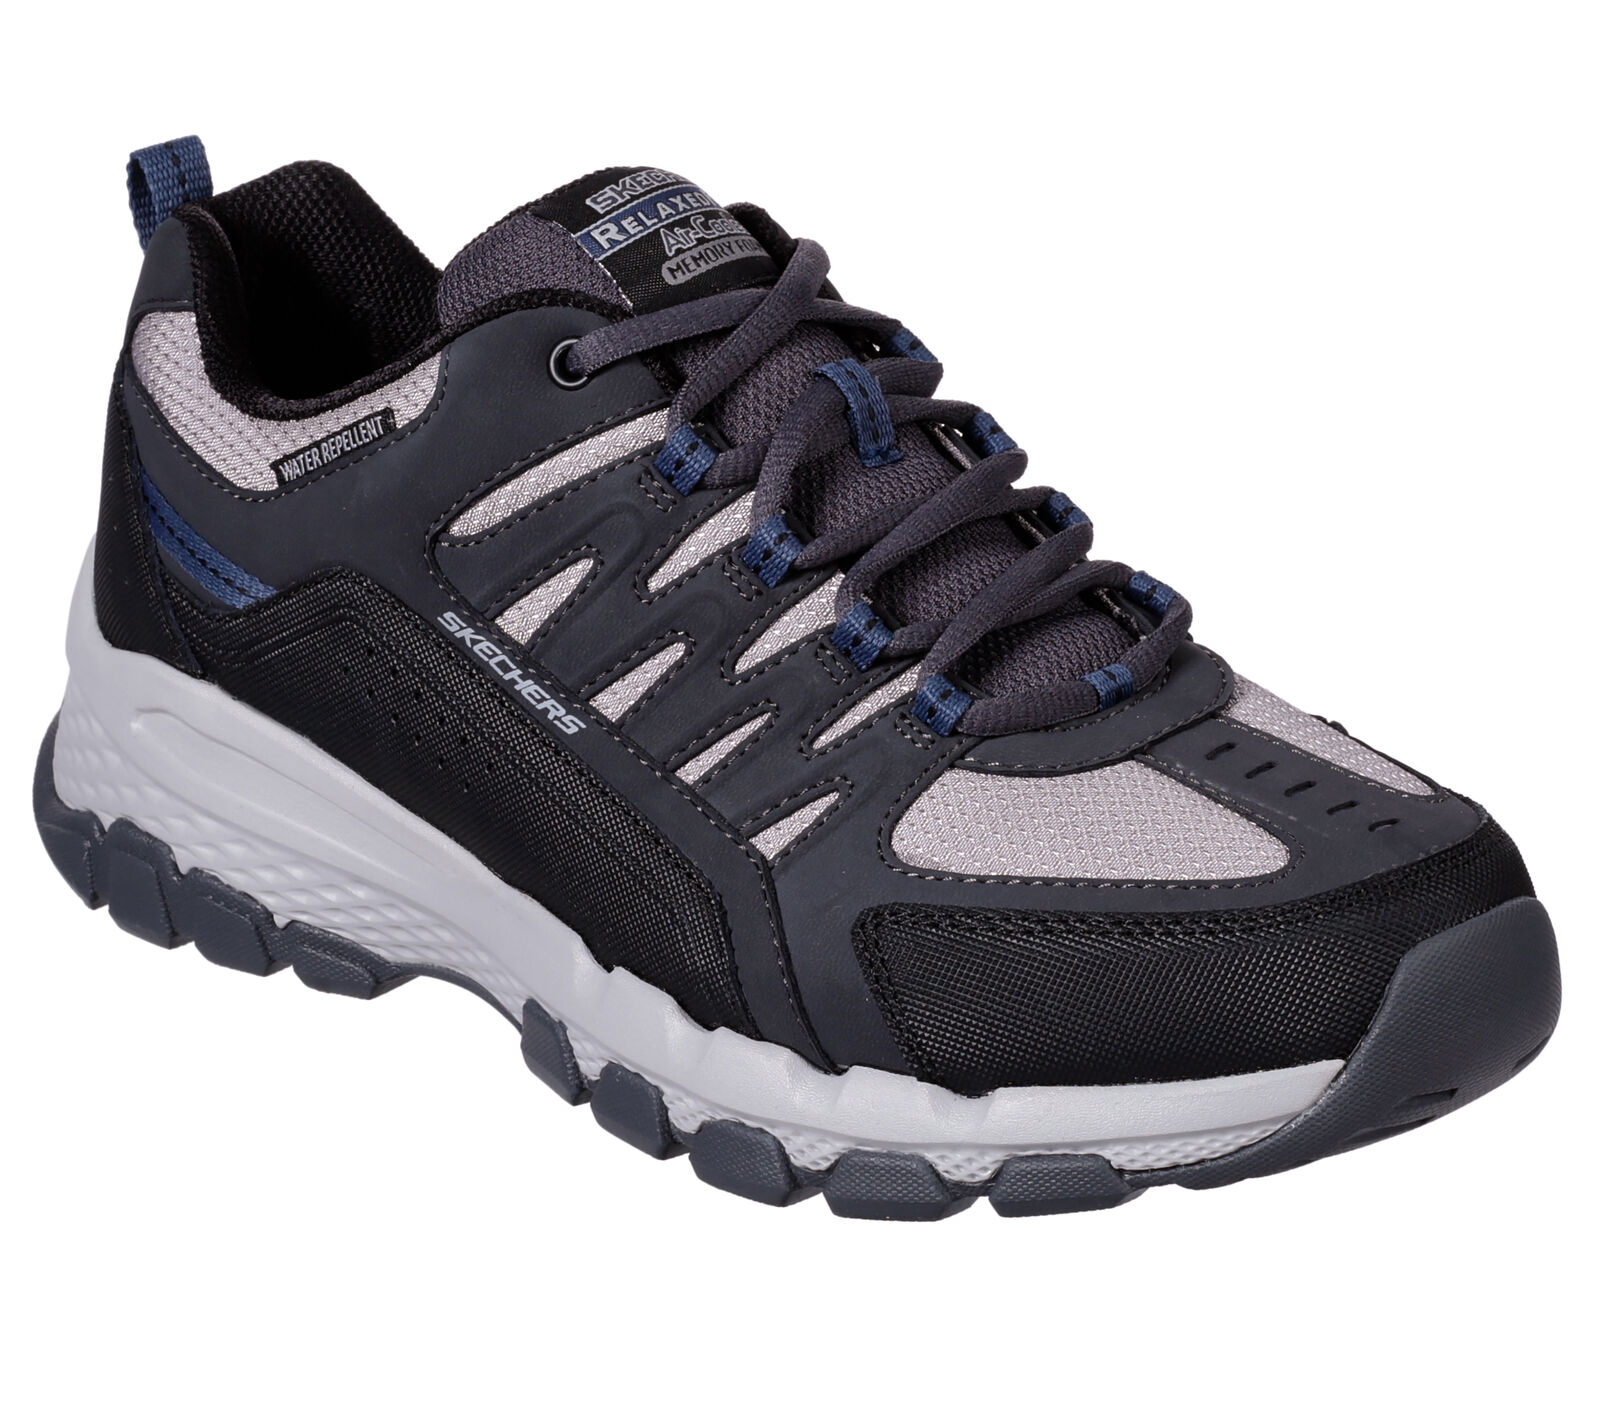 Shop the Relaxed Fit: Outland 2.0 - Rip-Staver | SKECHERS